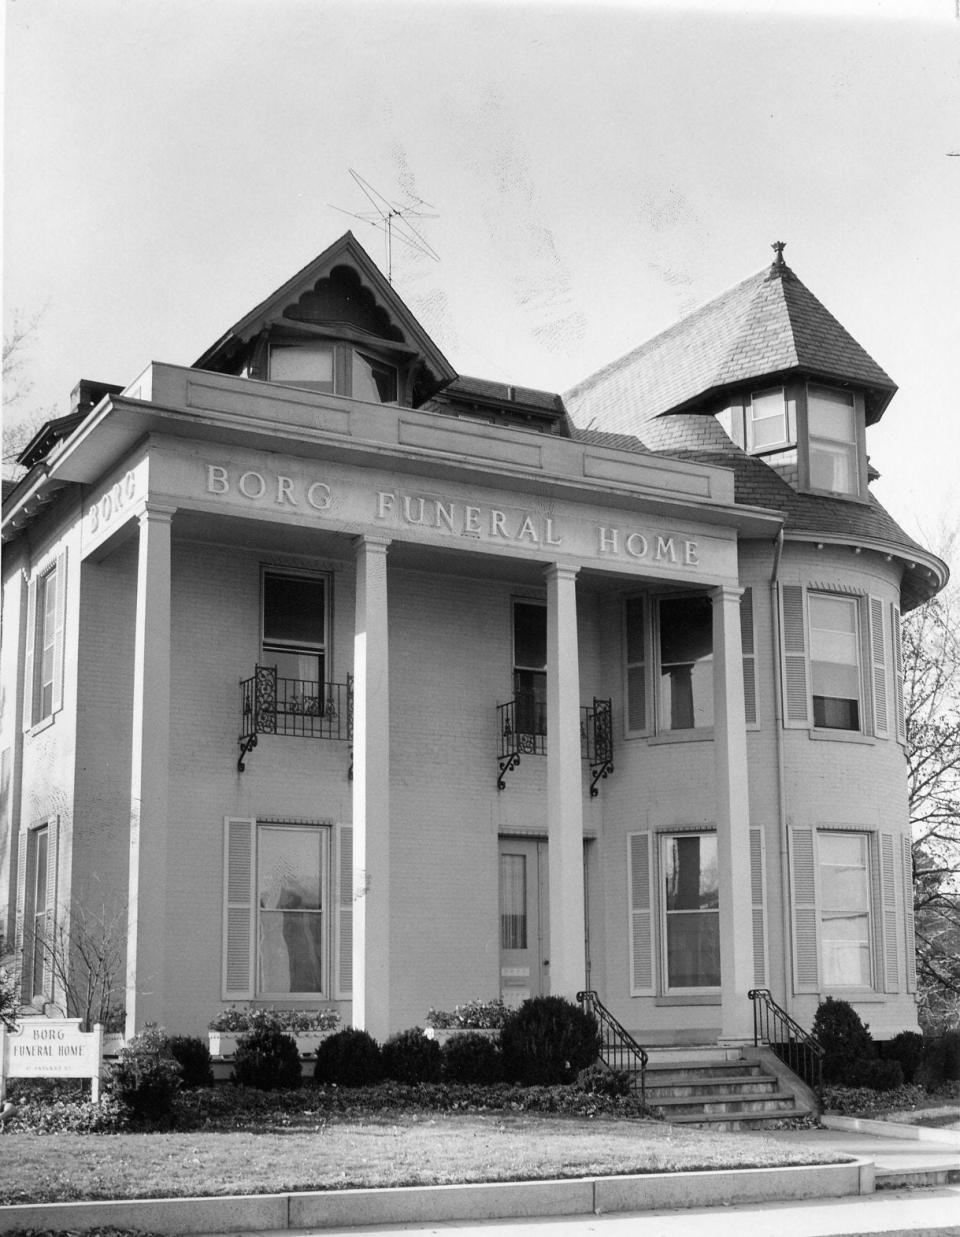 The two-story porch on the front of the house was not part of the original design.